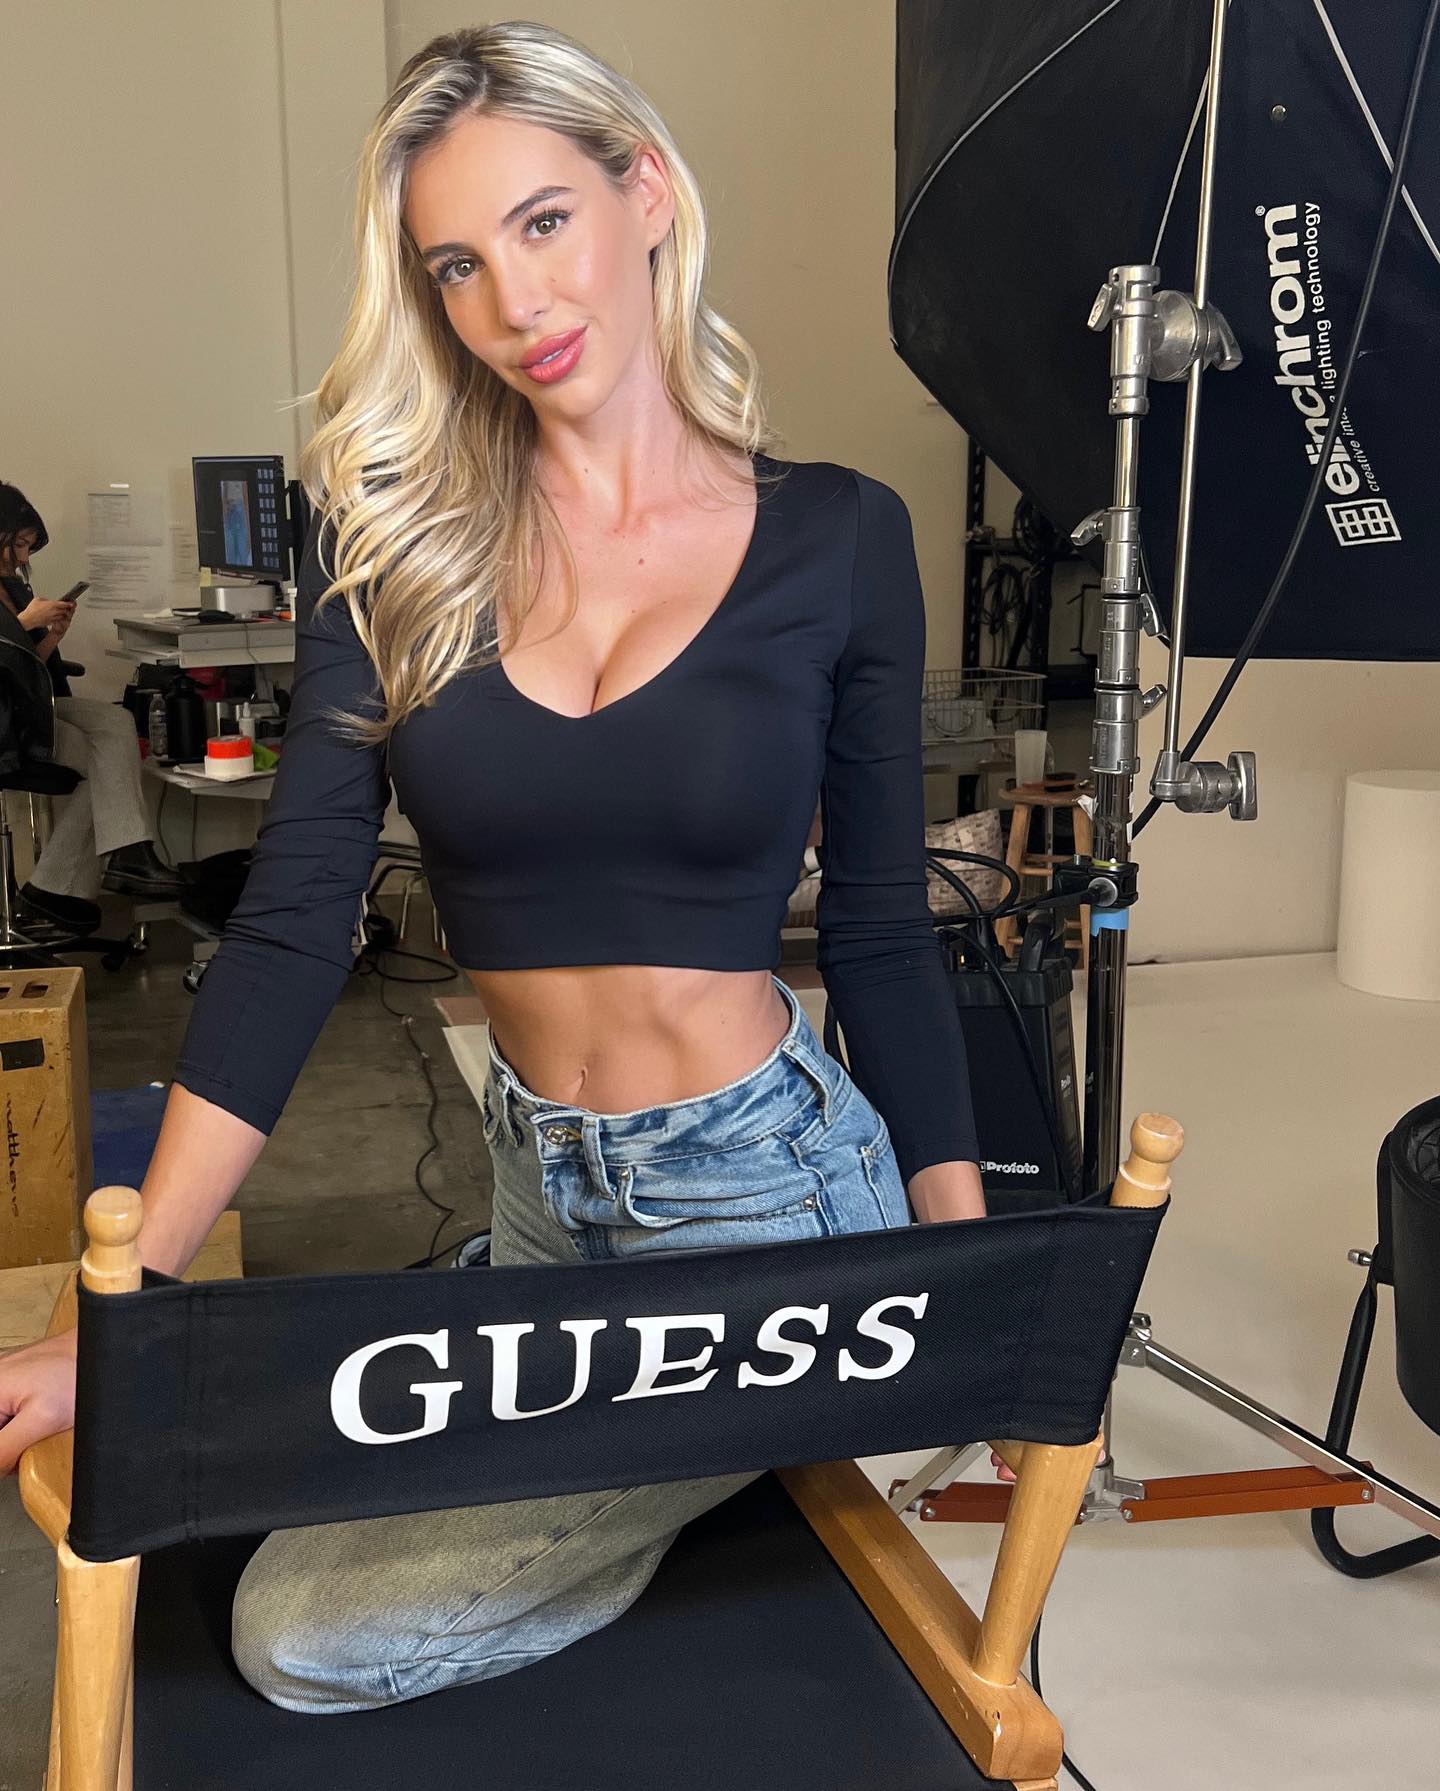 Teresi stunned fans in her latest post, posing in a black crop top and jeans